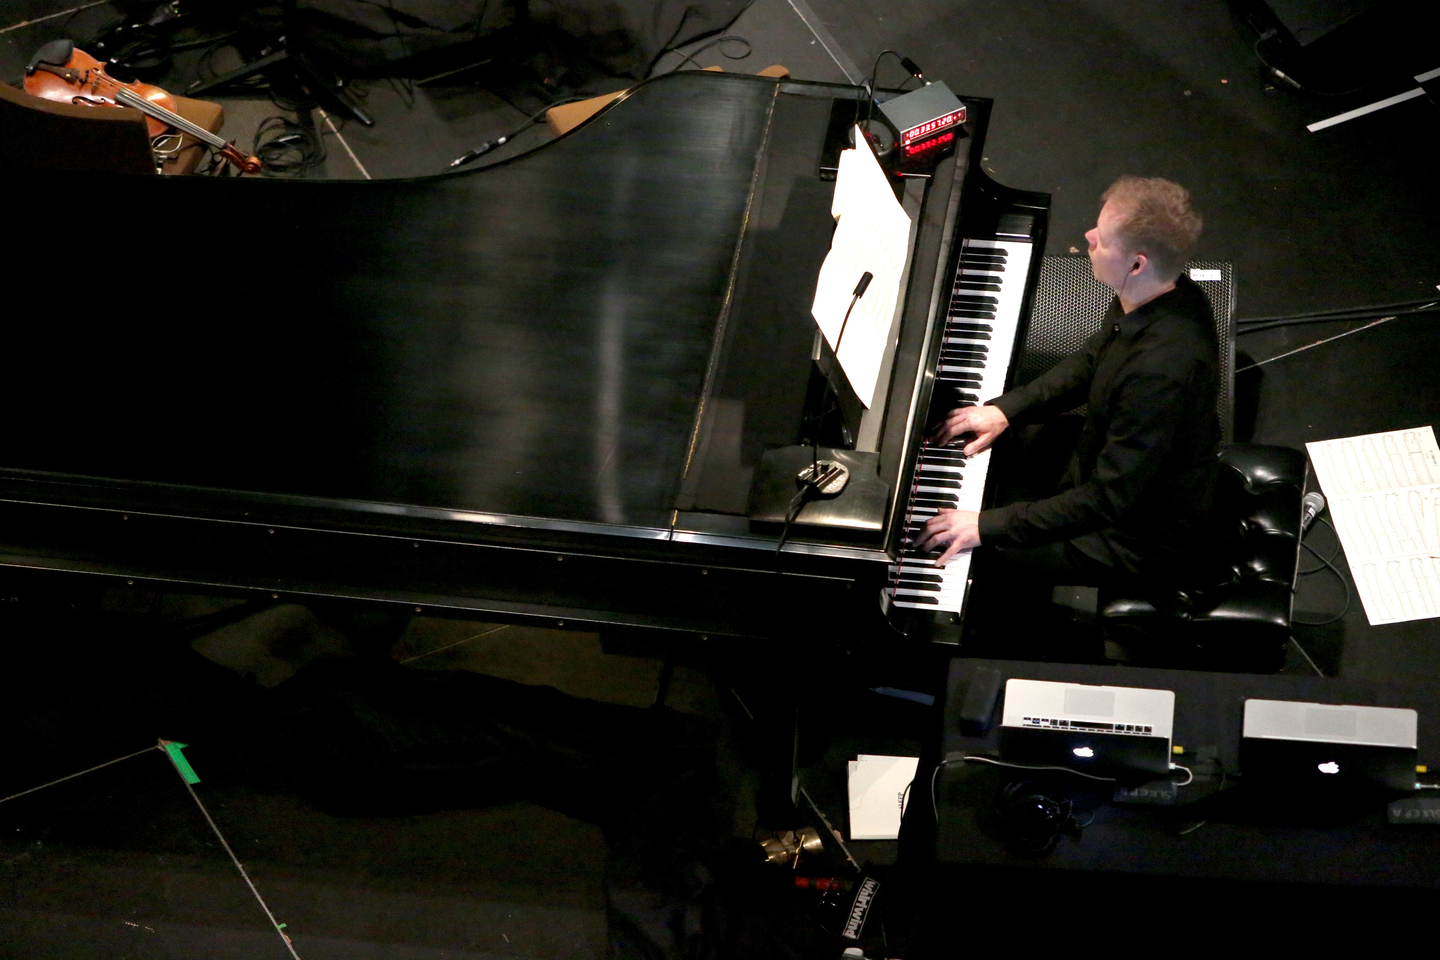 No sleep for Max Richter during his 8-hour performance at The Bass Concert Hall.